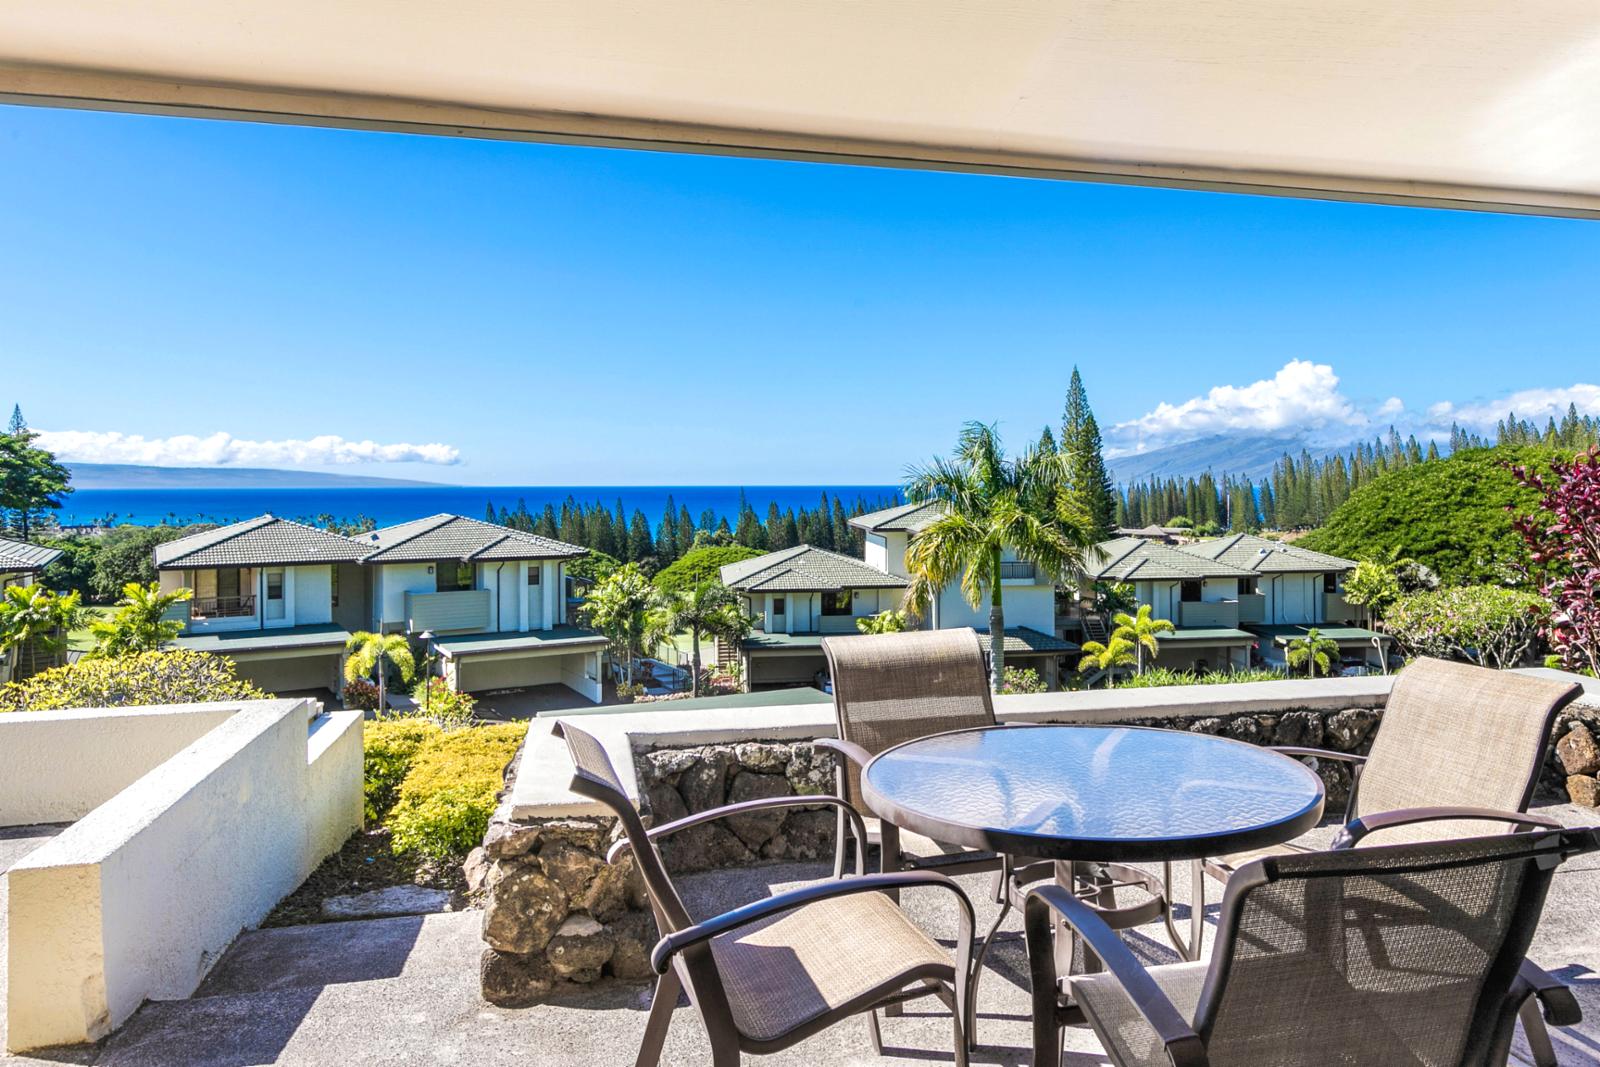 View the entrance of your Maui getaway from the lanai!